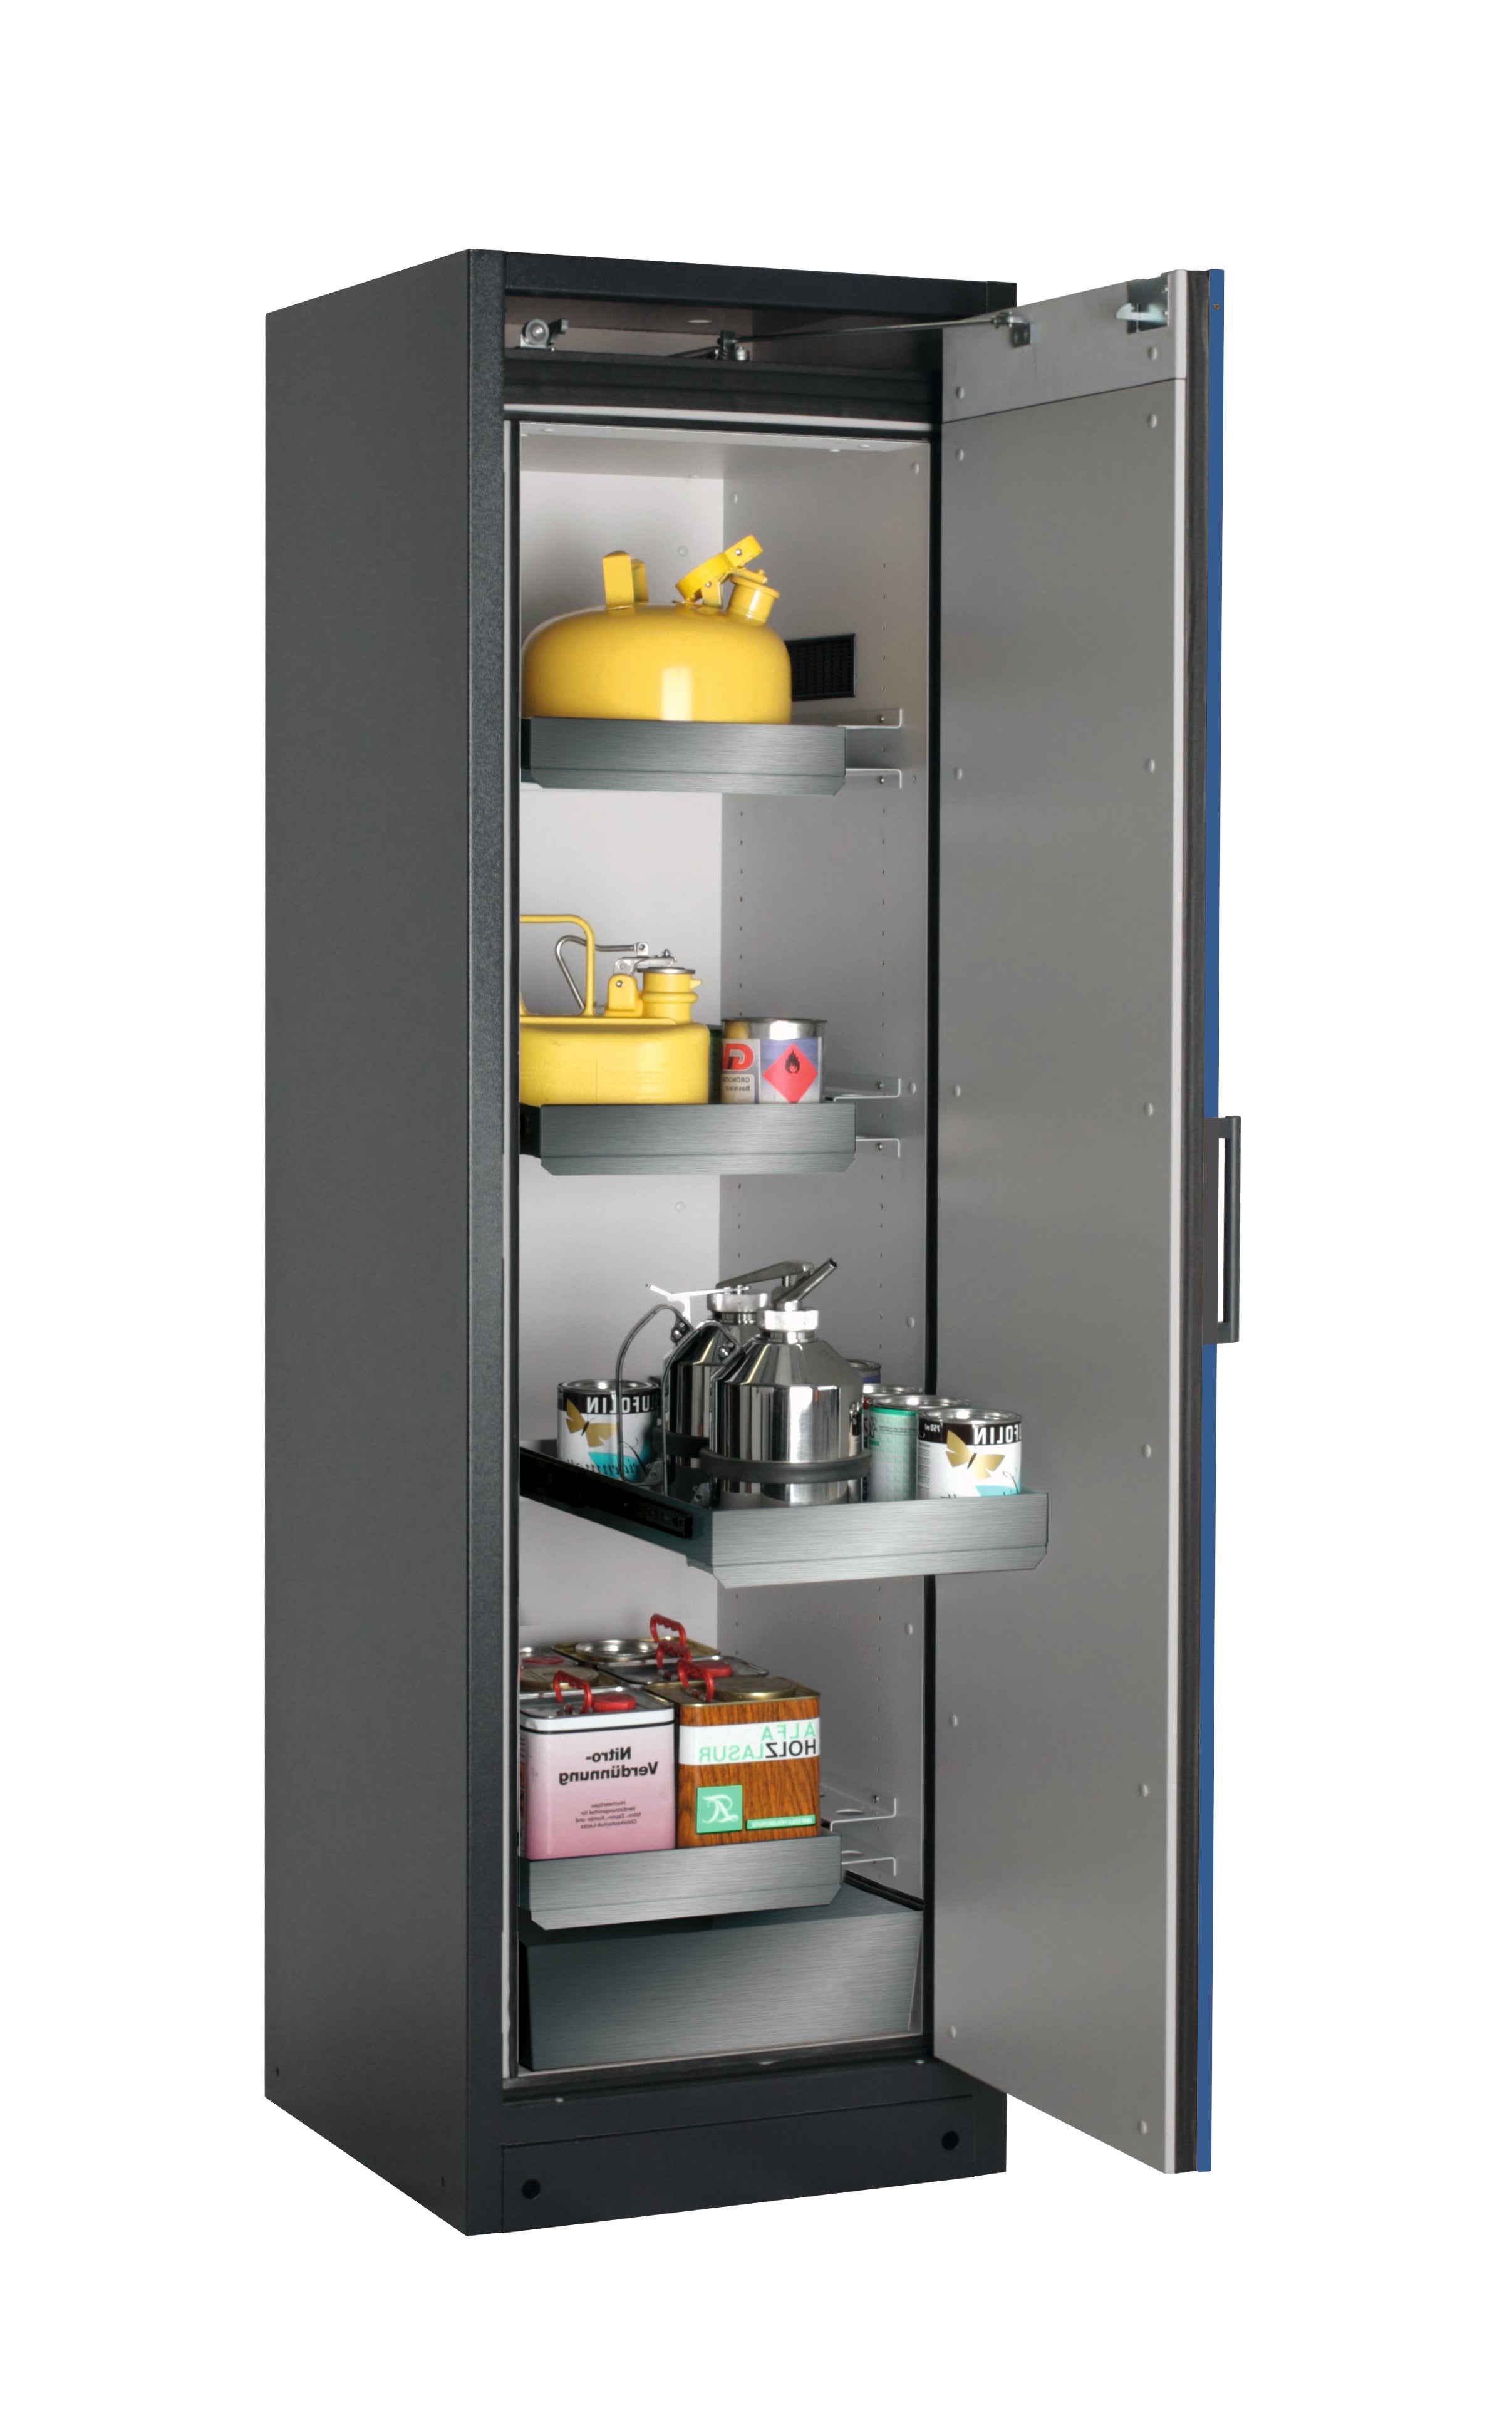 Type 90 safety storage cabinet Q-CLASSIC-90 model Q90.195.060.R in gentian blue RAL 5010 with 3x drawer (standard) (stainless steel 1.4301),